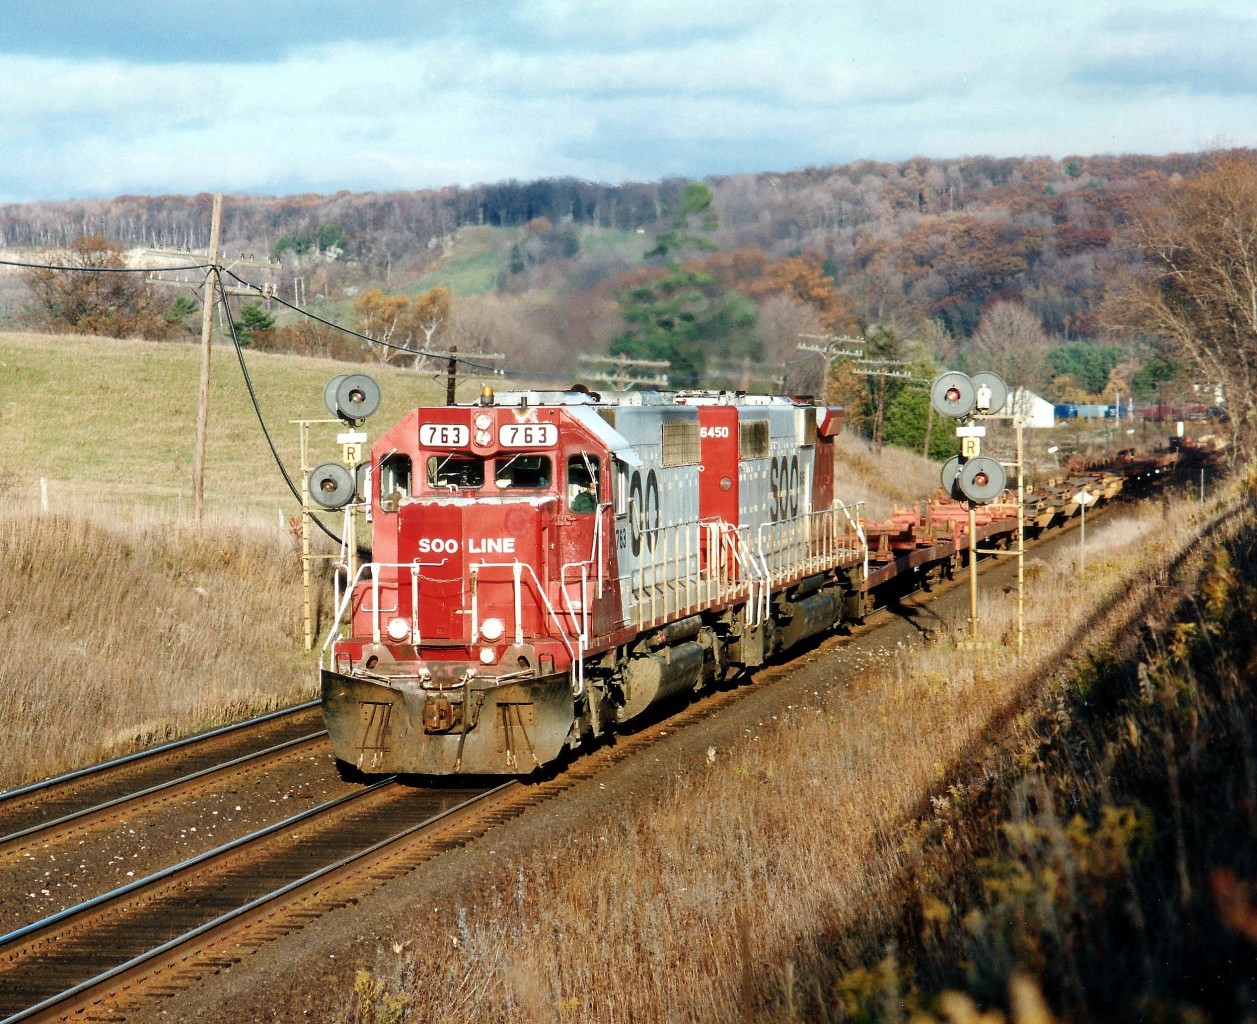 The SOO had one cabless "B" unit on their roster thru the 1990s. Here it looks somewhat of an oddity as it rolls west on train #503, as seen from the horse farm just east of Canyon Rd. It is getting late in the afternoon as SOO 763 and 6450 climb the long grade to Campbellville. The "B" was retired in 2002.